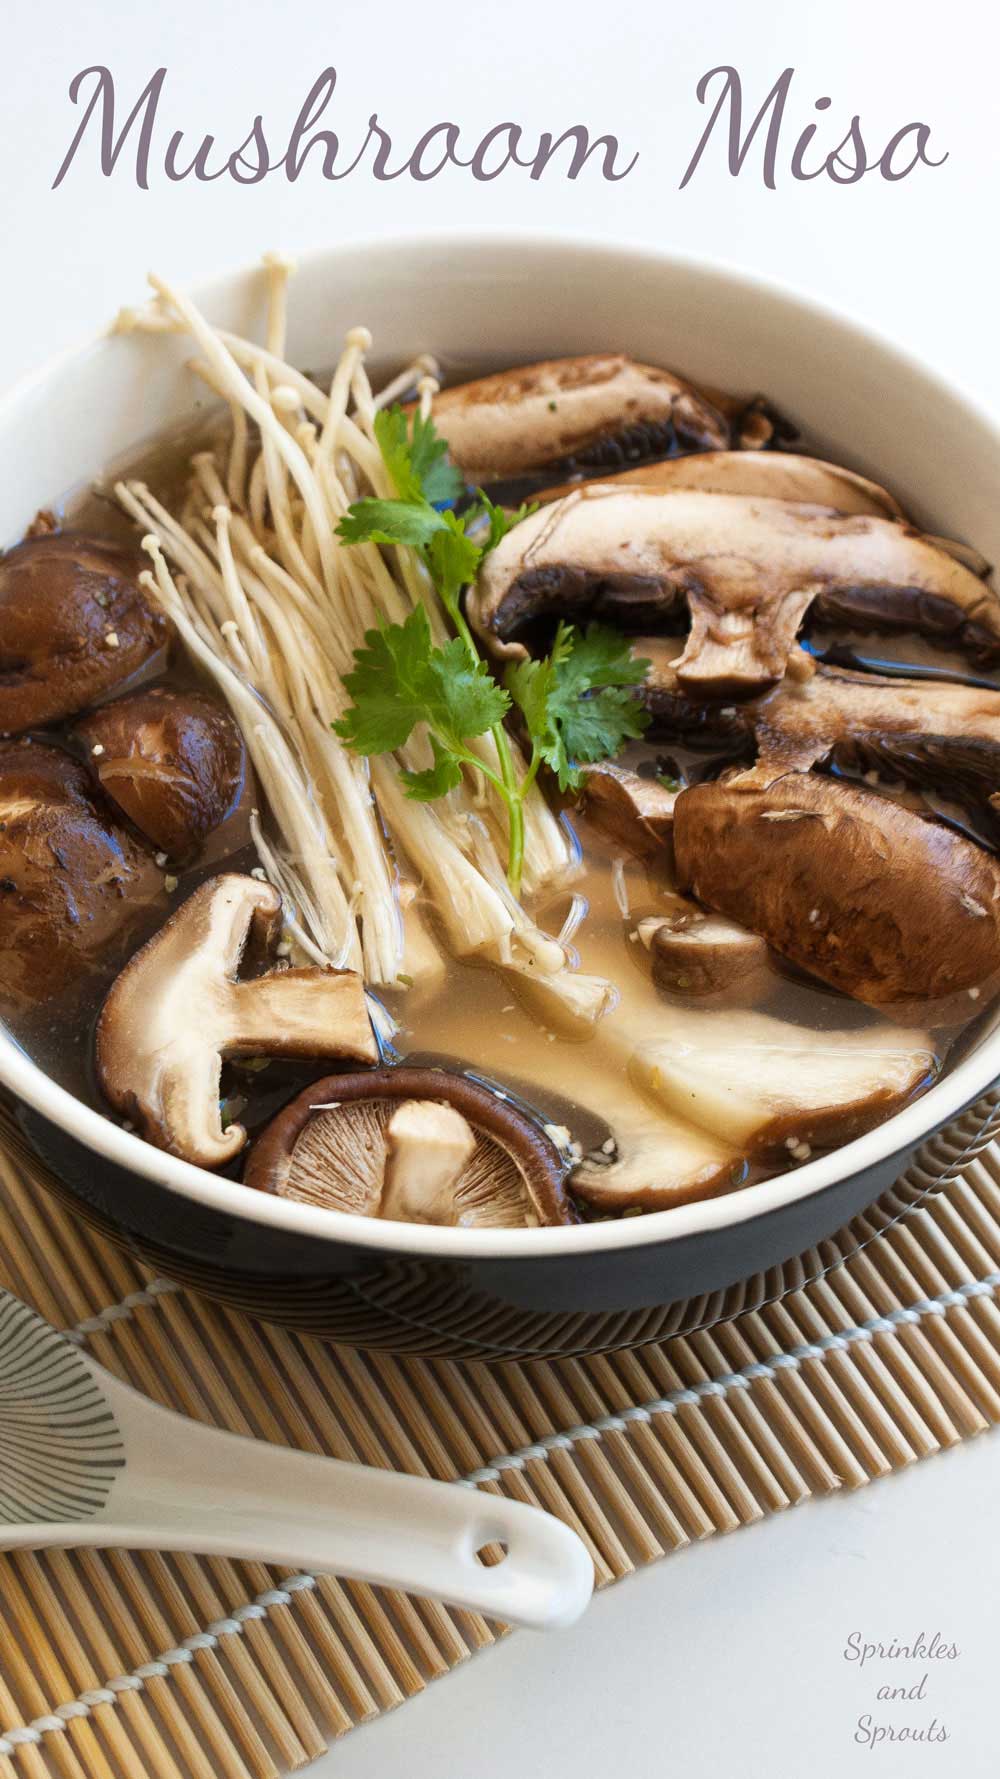 Mushroom Miso Soup. A great vegetarian lunch that is quick to prepare.